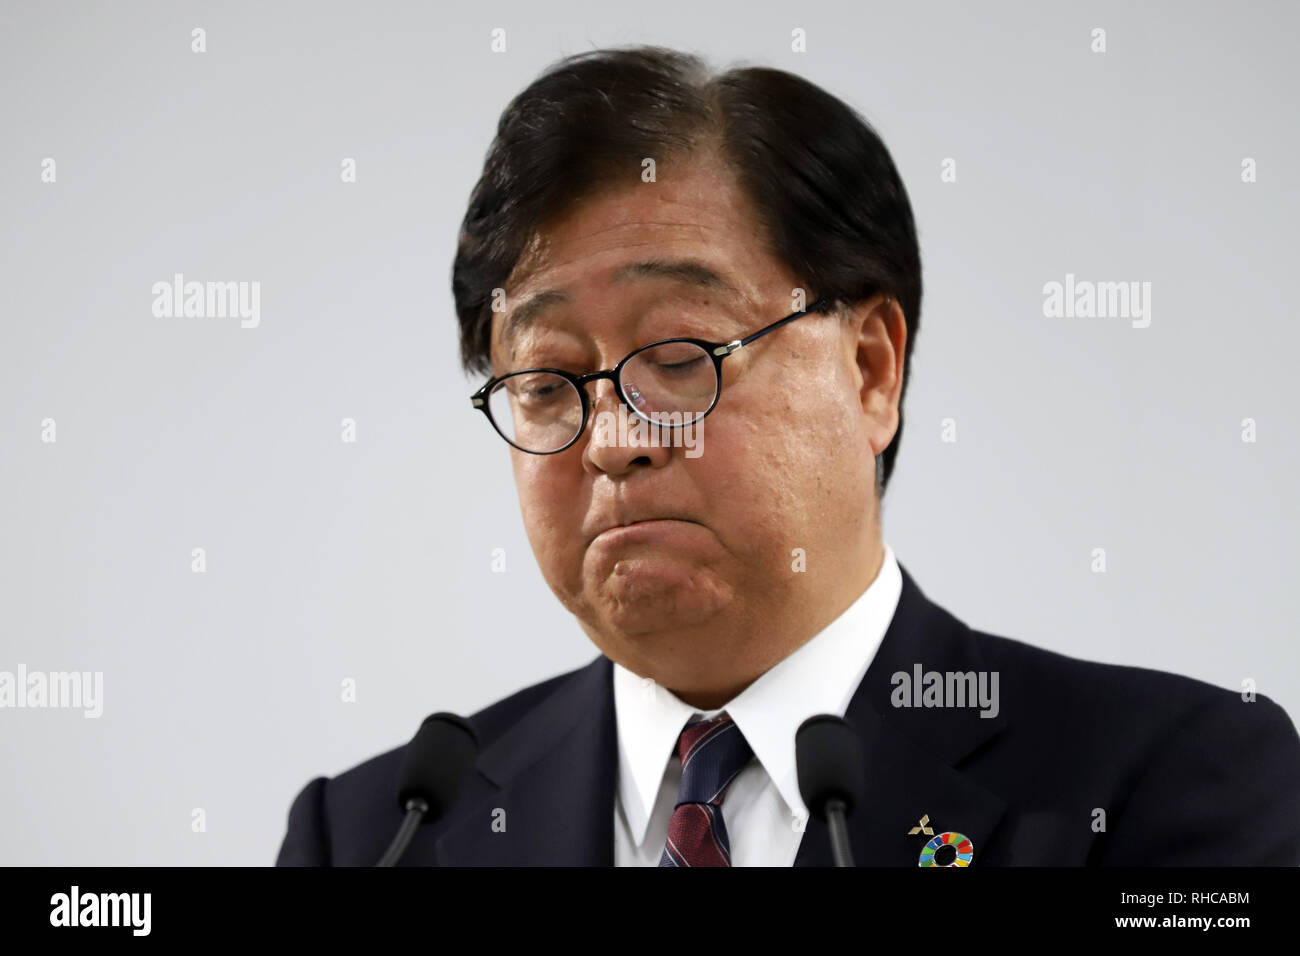 Tokyo, Japan. 1st Feb, 2019. Japan's automaker Mitsubishi Motors chairman and CEO Osamu Masuko announces the company's third-quarter financial result ended December 31 at the Mitsubishi Motors headquarters in Tokyo on Friday, February1, 2019. Masuko joined a video conference with Nissan Motor president Hiroto Saikawa and Renault SA chairman Jean-Dominique Senard to maintain their alliance on January 31 after former boss Carlos Ghosn was arrested by Japanese prosecutors over alleged financial misconduct. Credit: Yoshio Tsunoda/AFLO/Alamy Live News Stock Photo